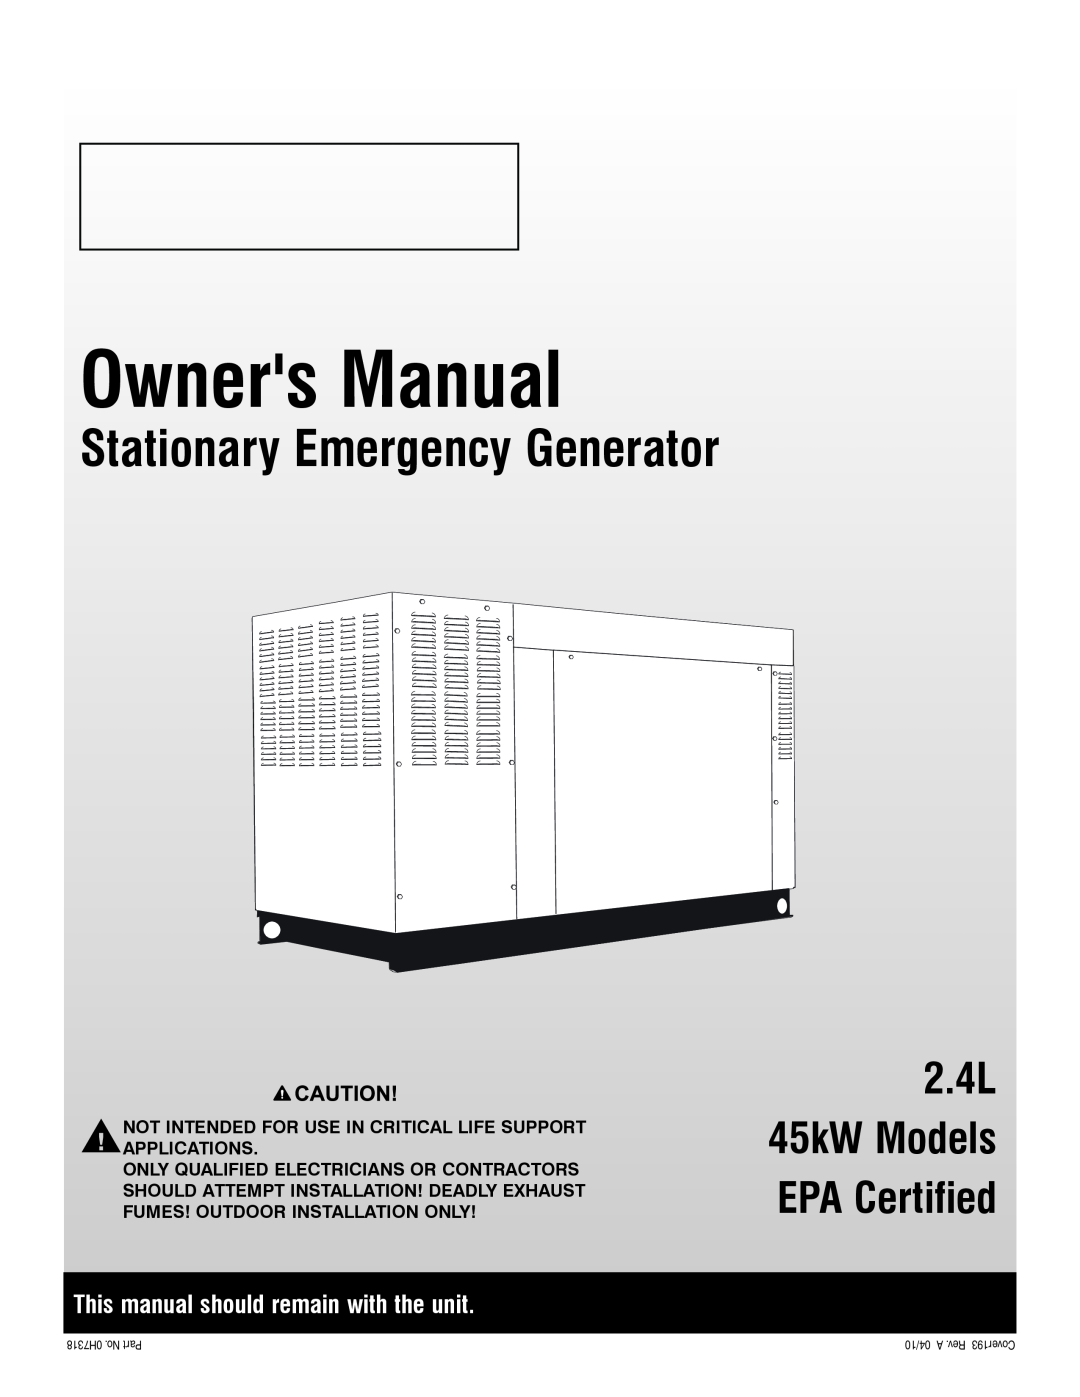 Generac QT04524ANSX owner manual This manual should remain with the unit, Owners Manual, Stationary Emergency Generator 